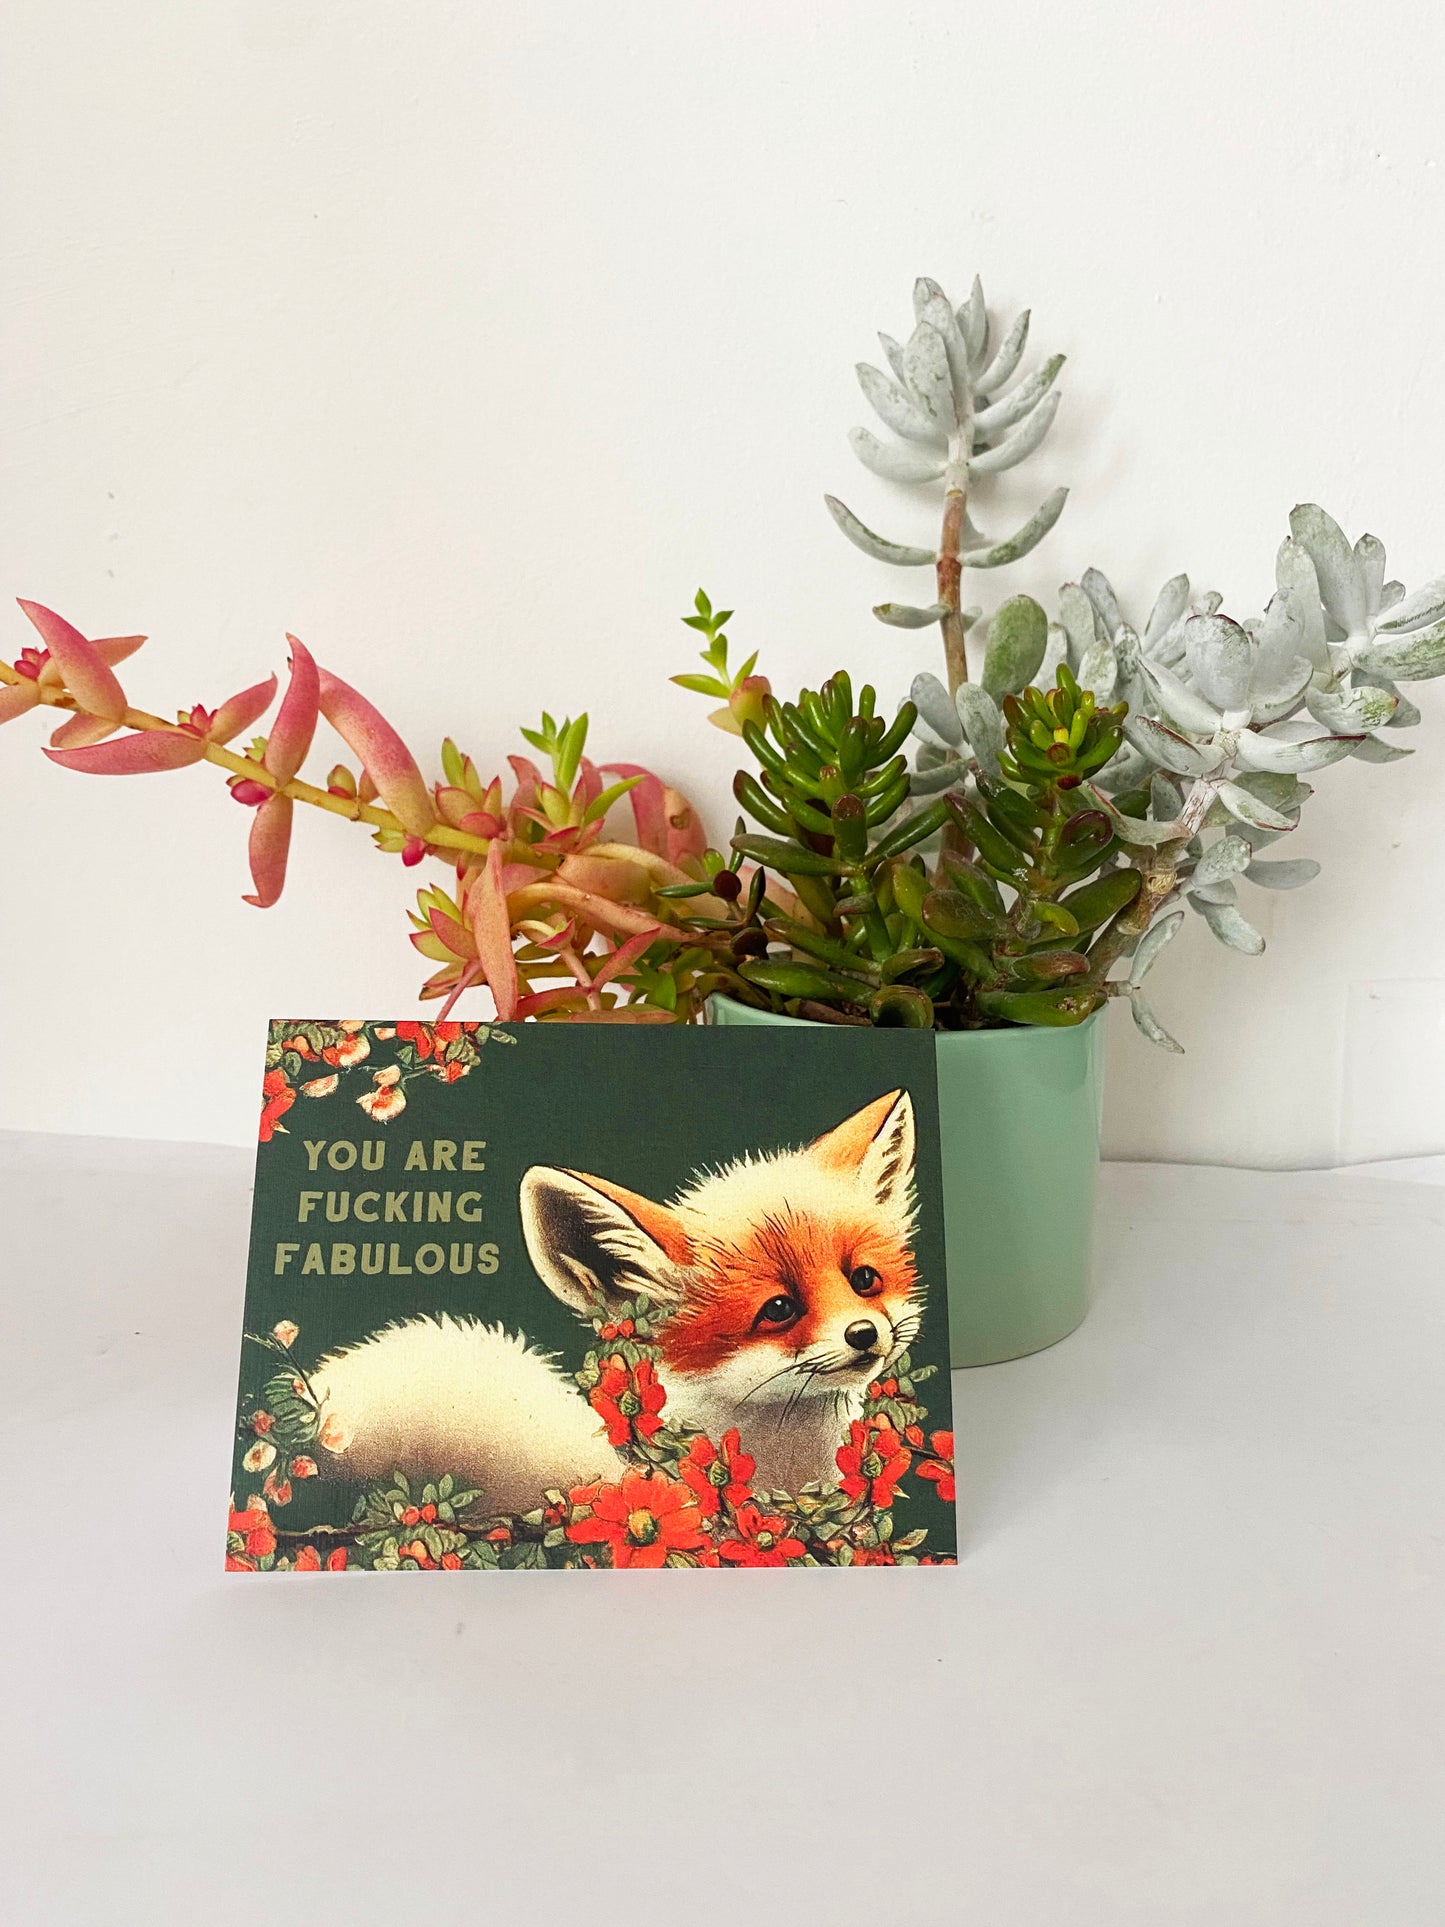 cute adorable fox greeting card you are fucking fabulous on front blank inside perfect for best friend girl friend crush birthday just because cheer up heartbreak boyfriend coin laundry red flowers dark green background outdoorsy animal lover fun vintage